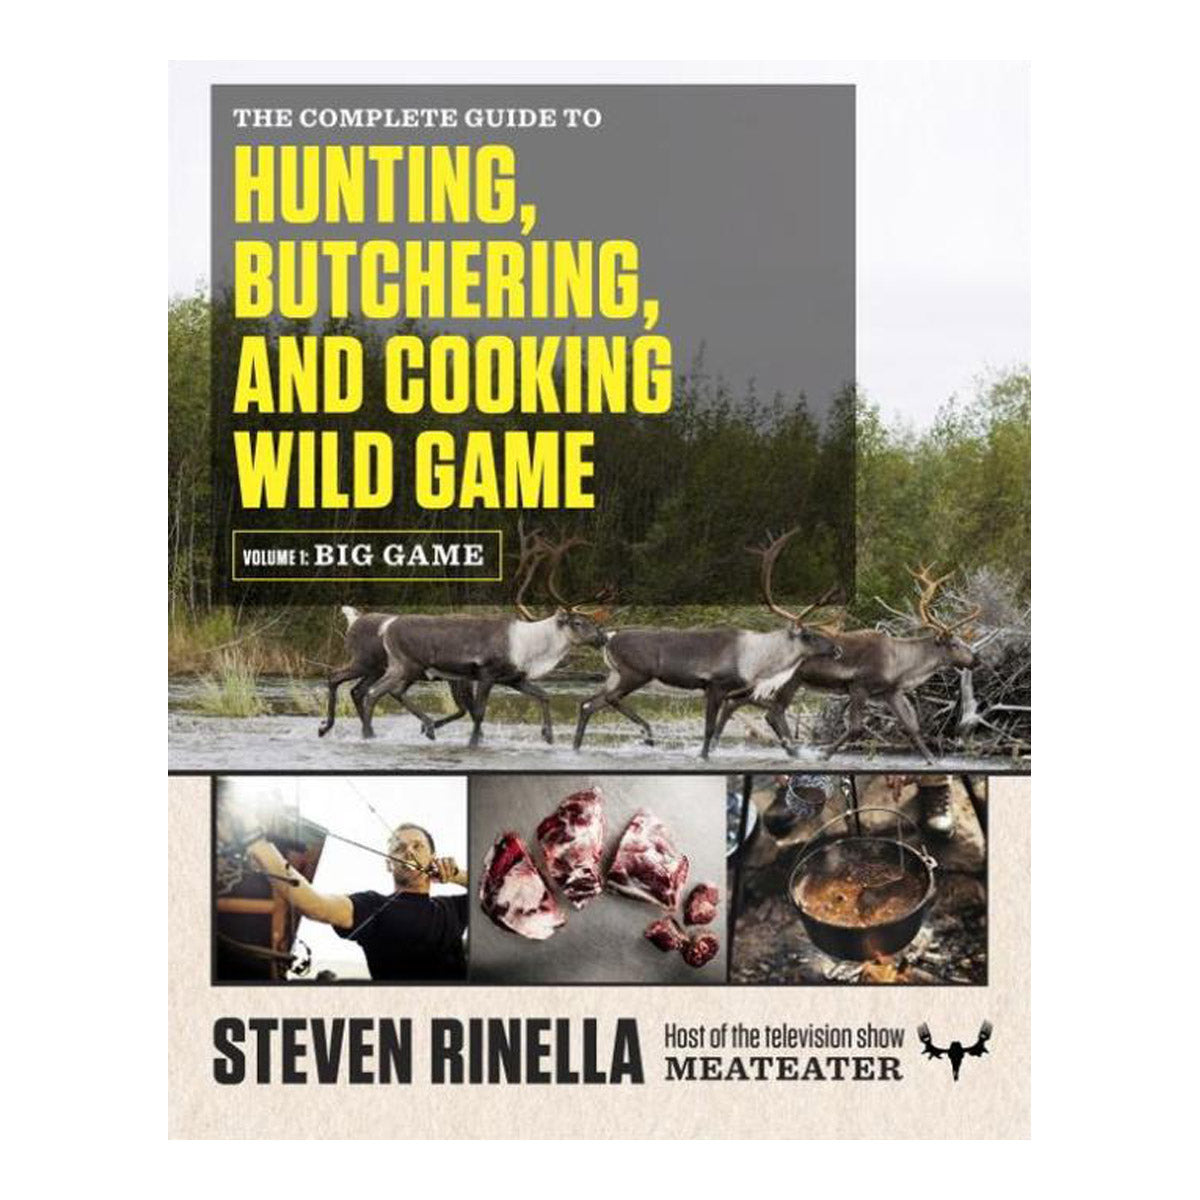 Complete Guide to Hunting, Butchering, and Cooking Wild Game by Steven Rinella